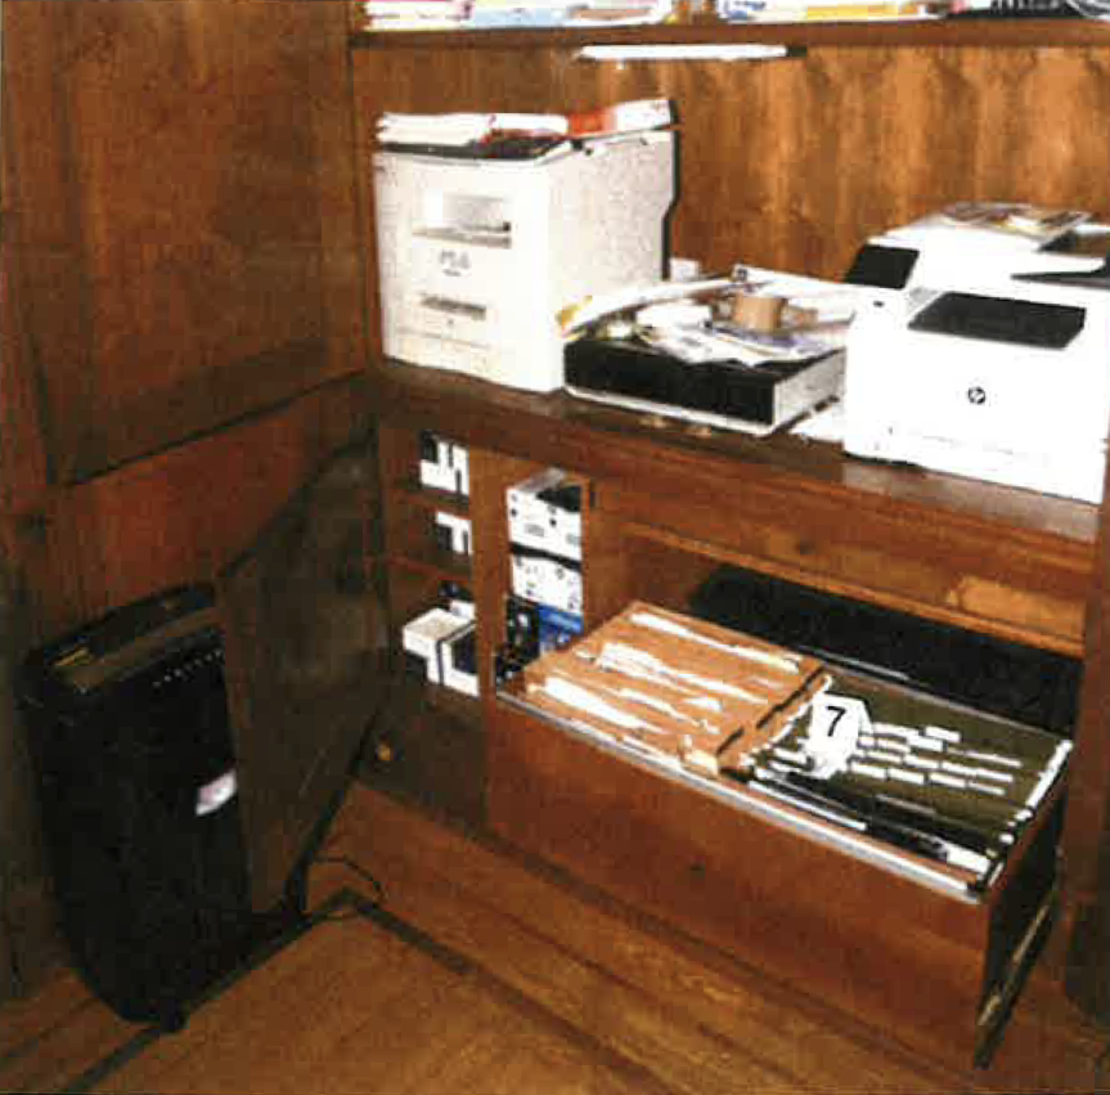 This photo from page 93 of the US Department of Justice Special Counsel's special report shows notebooks in a file cabinet in President Joe Biden's Delaware home office.